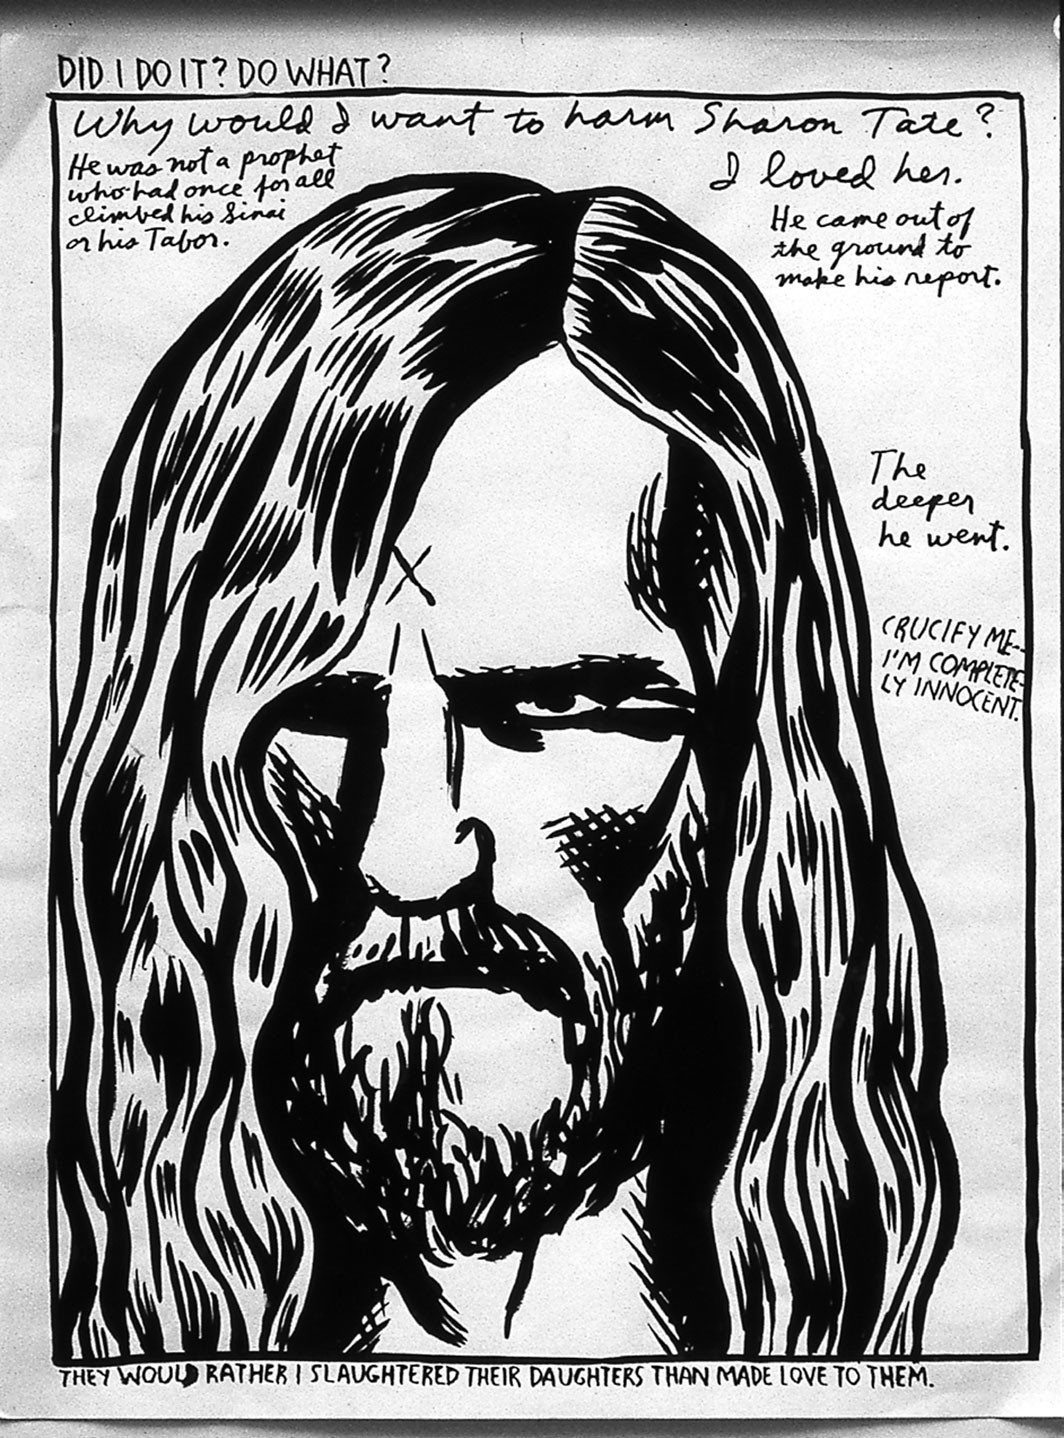 Raymond Pettibon, Untitled (Did I do...), 1987, pen and ink on paper, 14 × 11".